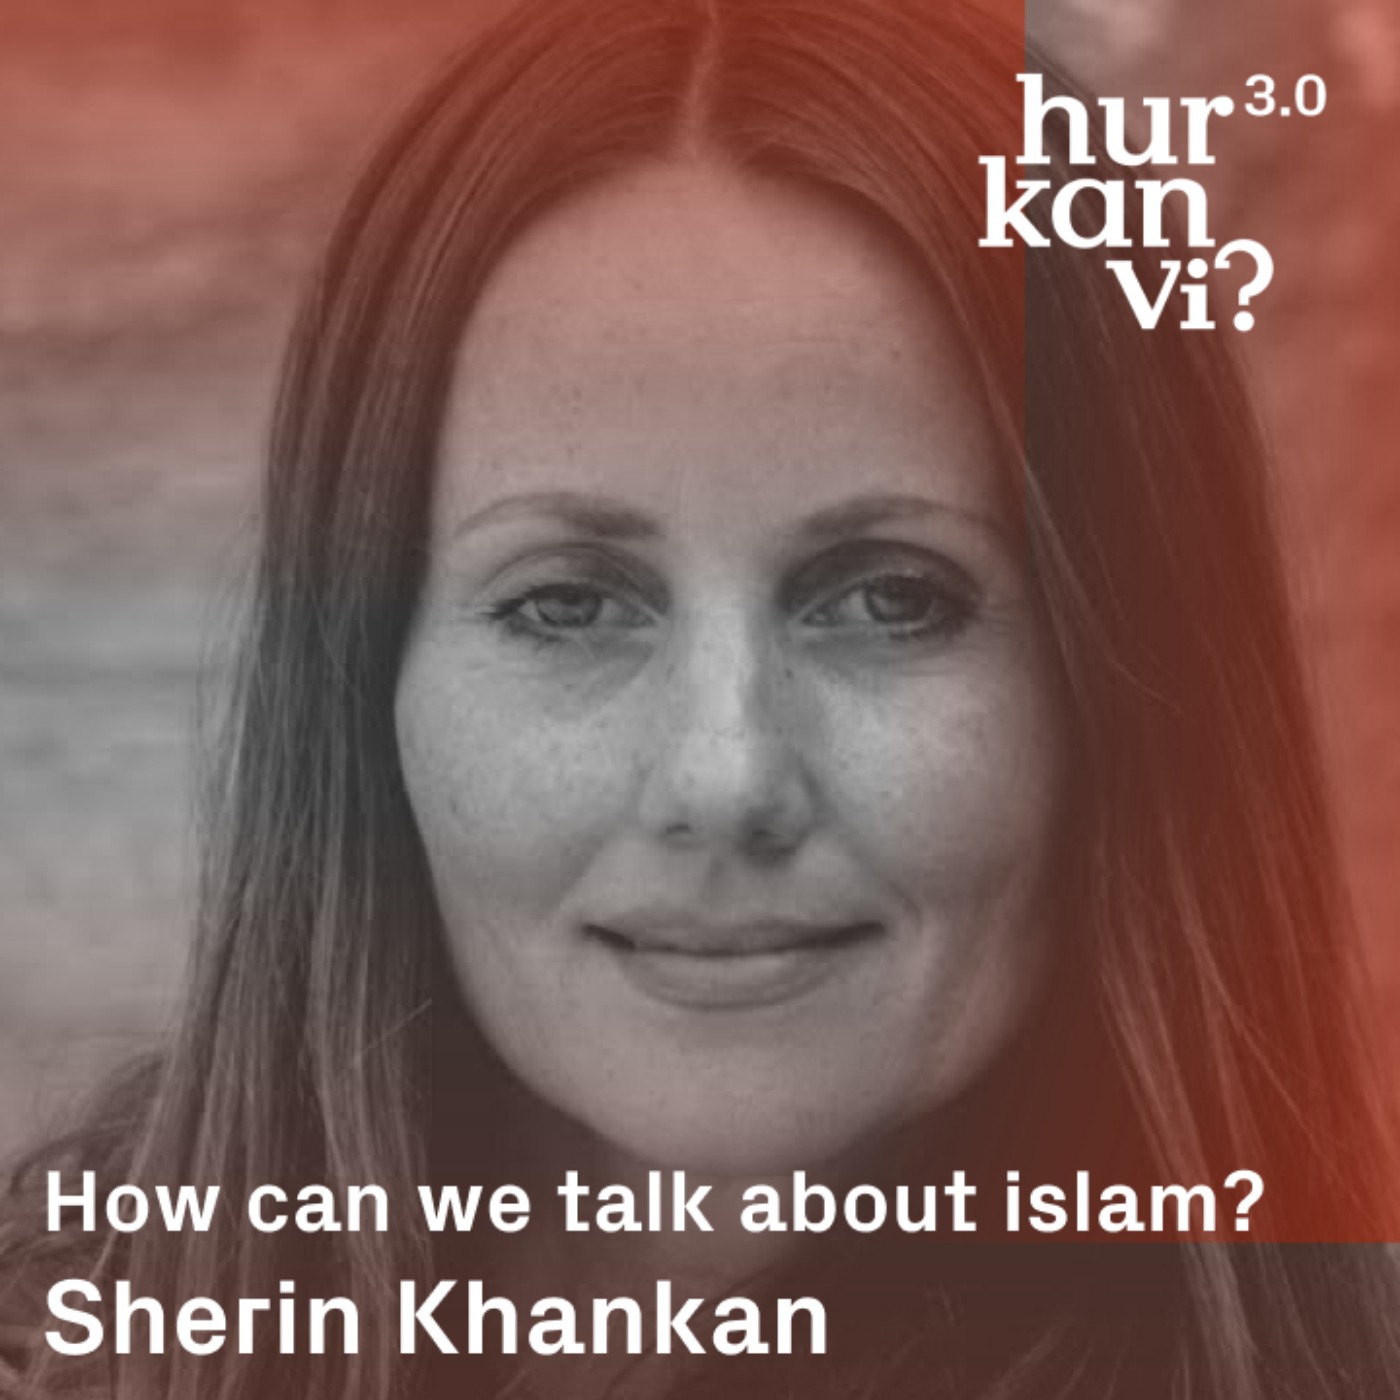 Sherin Khankan - How can we talk about islam?